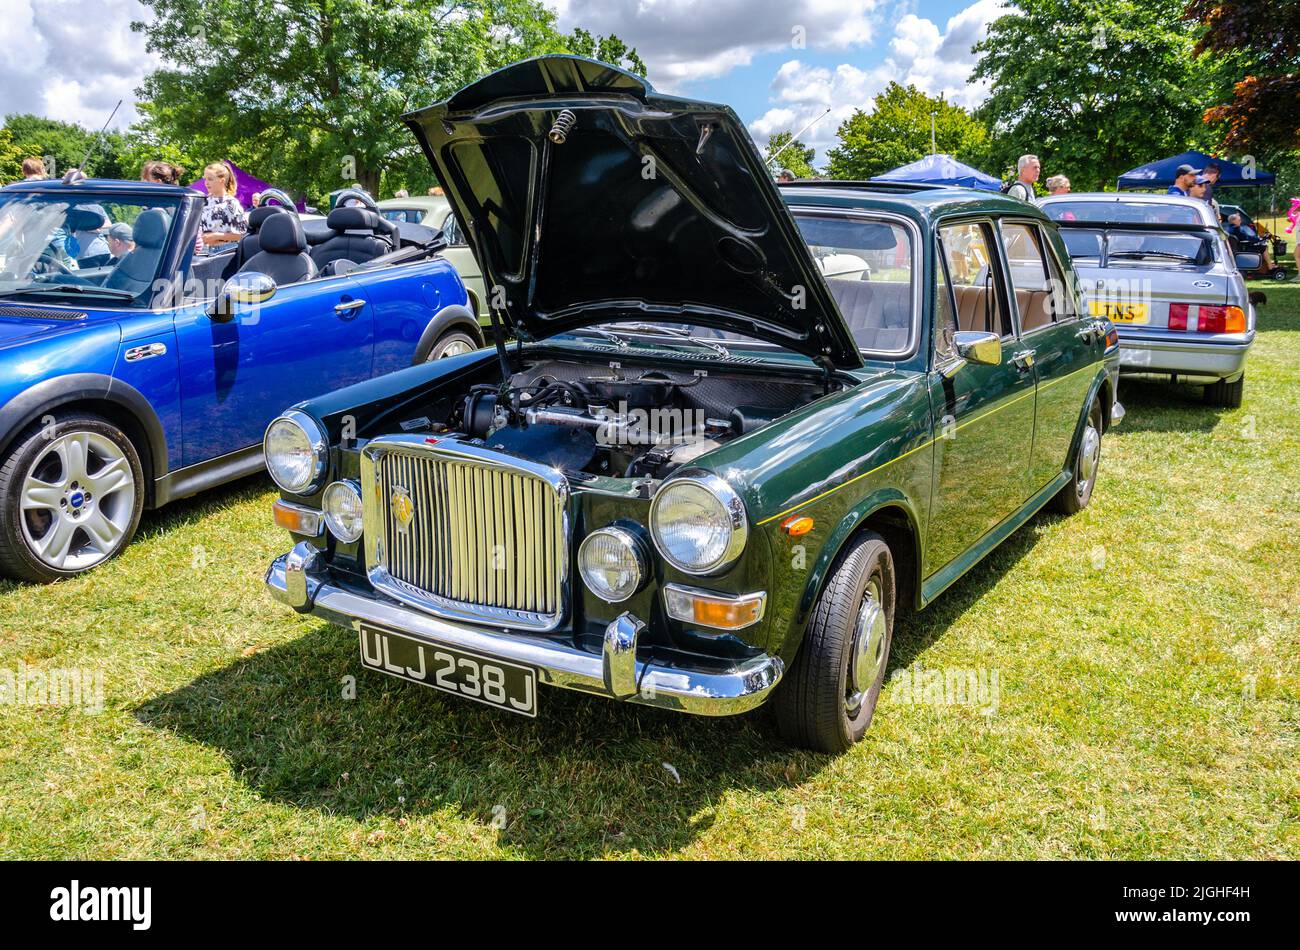 Front view of a 1970 Austin Princess 1300 Vanden Plas vintage car  at The Berkshire Motor Show in Reading, UK Stock Photo